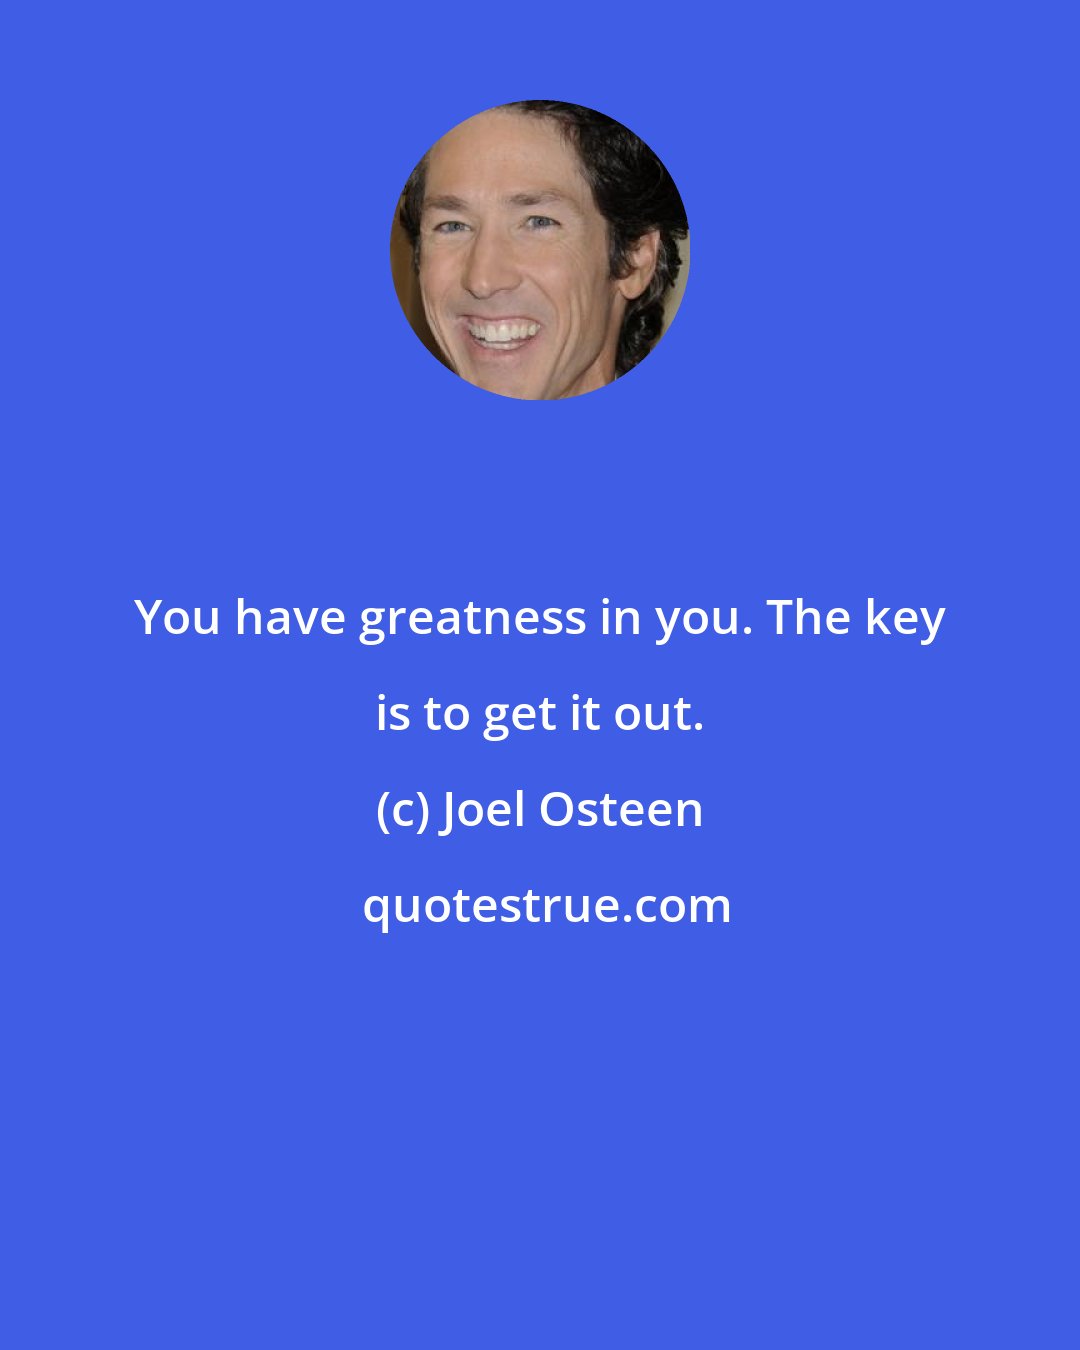 Joel Osteen: You have greatness in you. The key is to get it out.